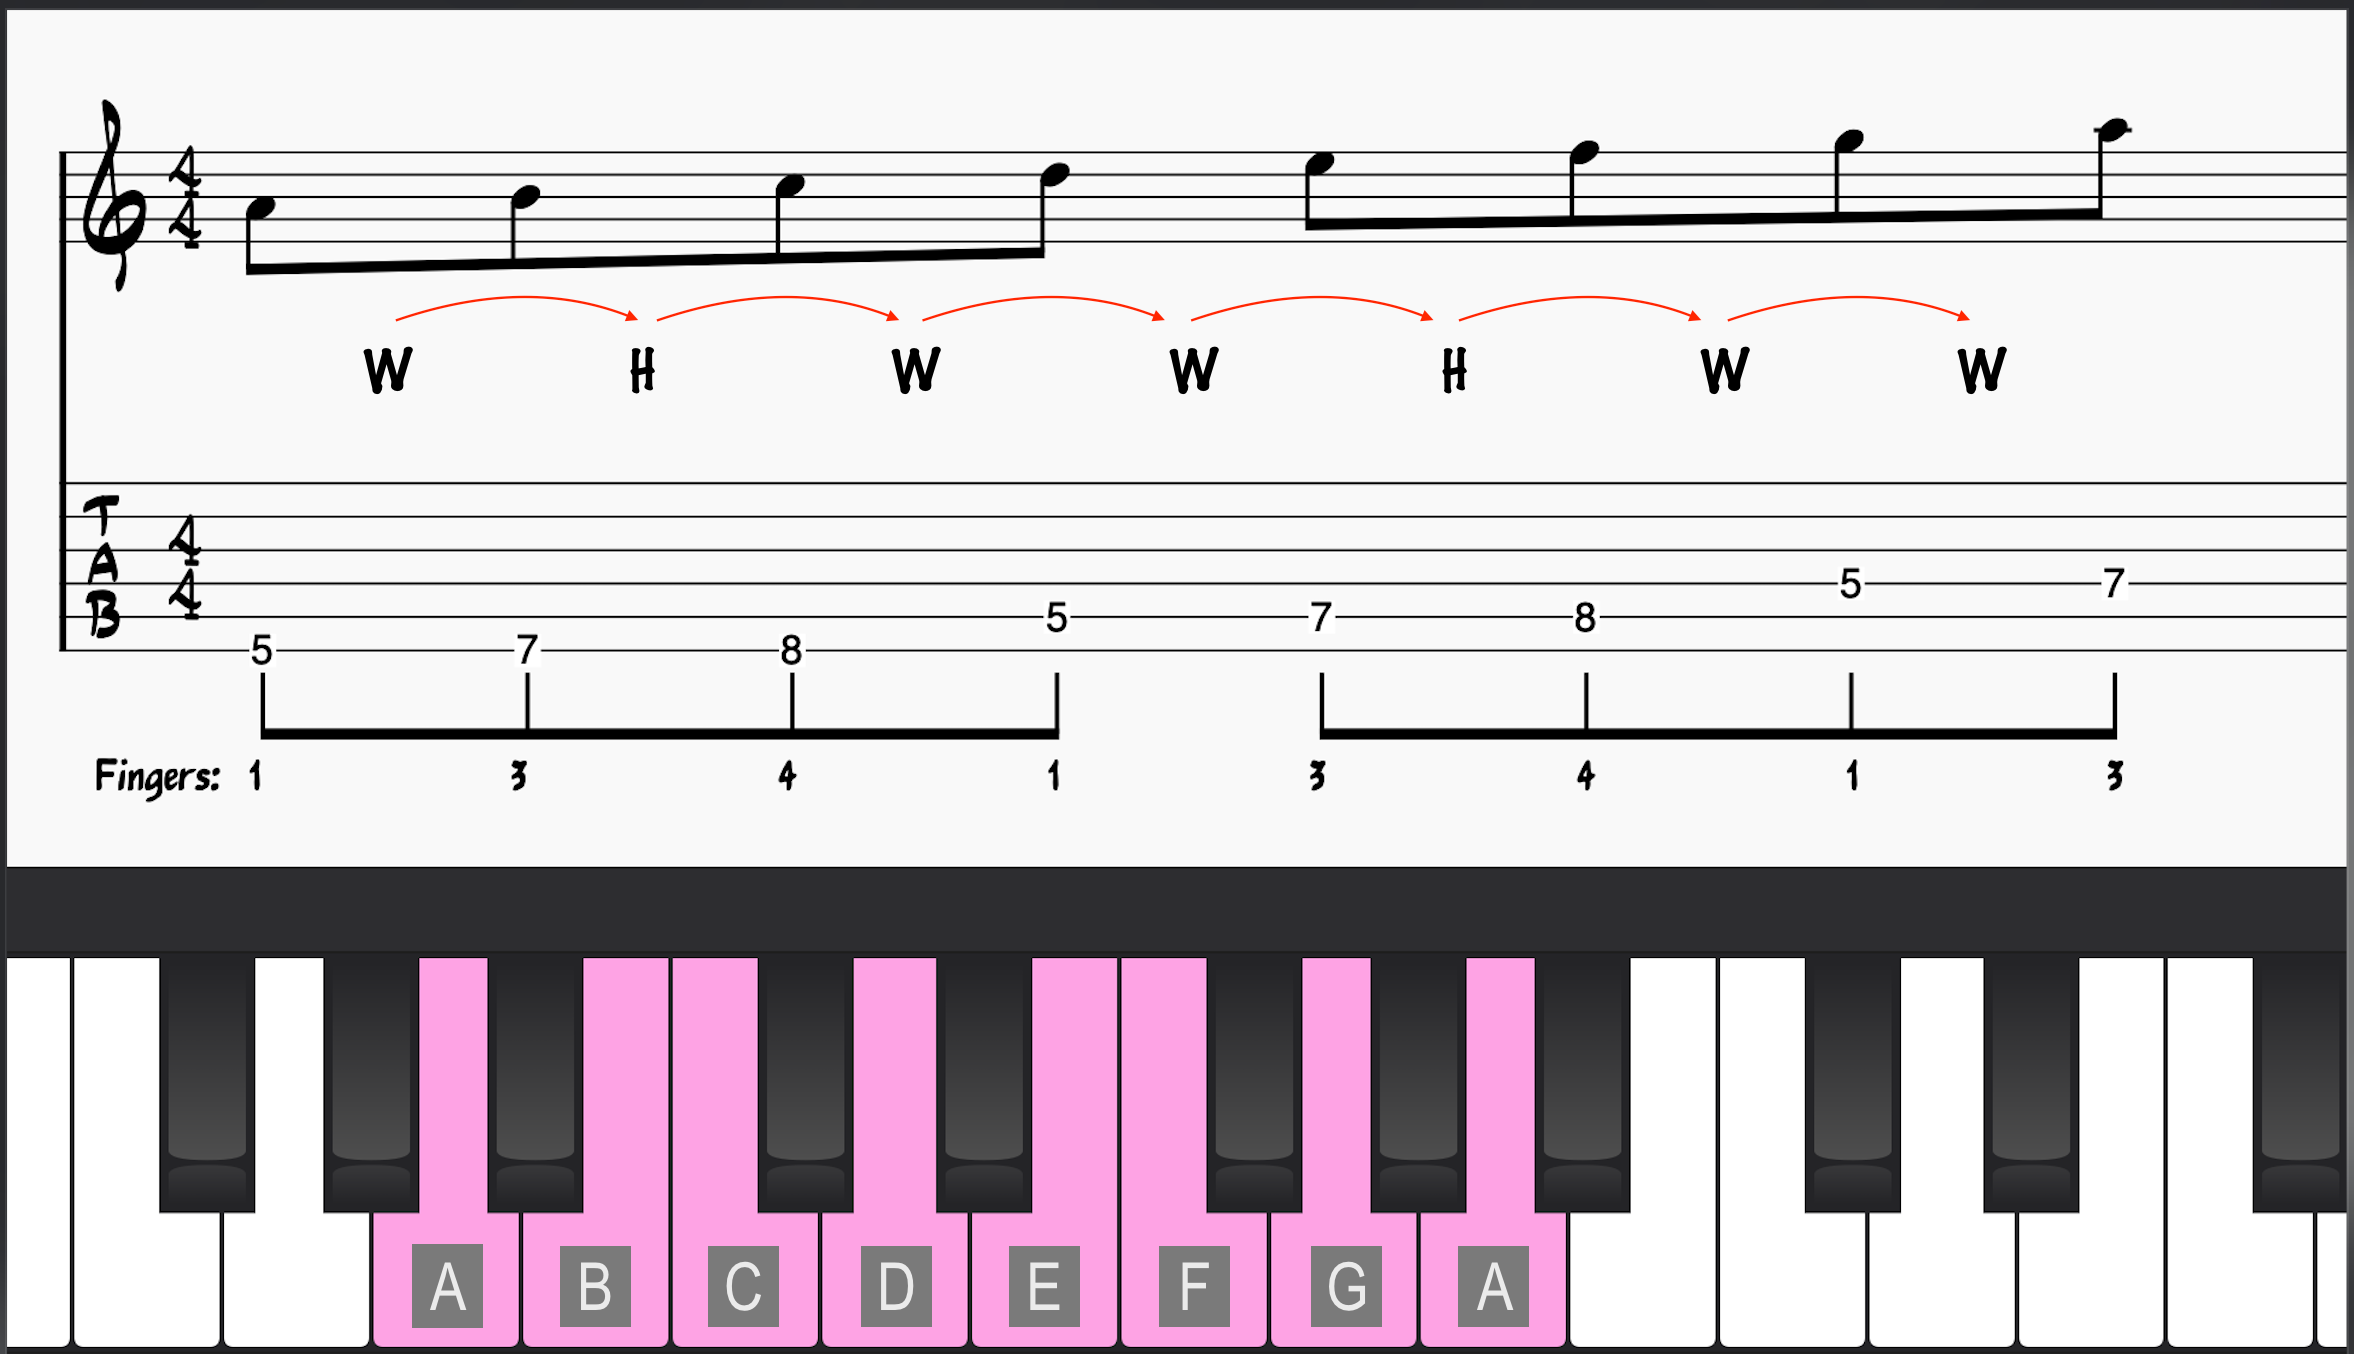 A Aeolian Scale on guitar and piano